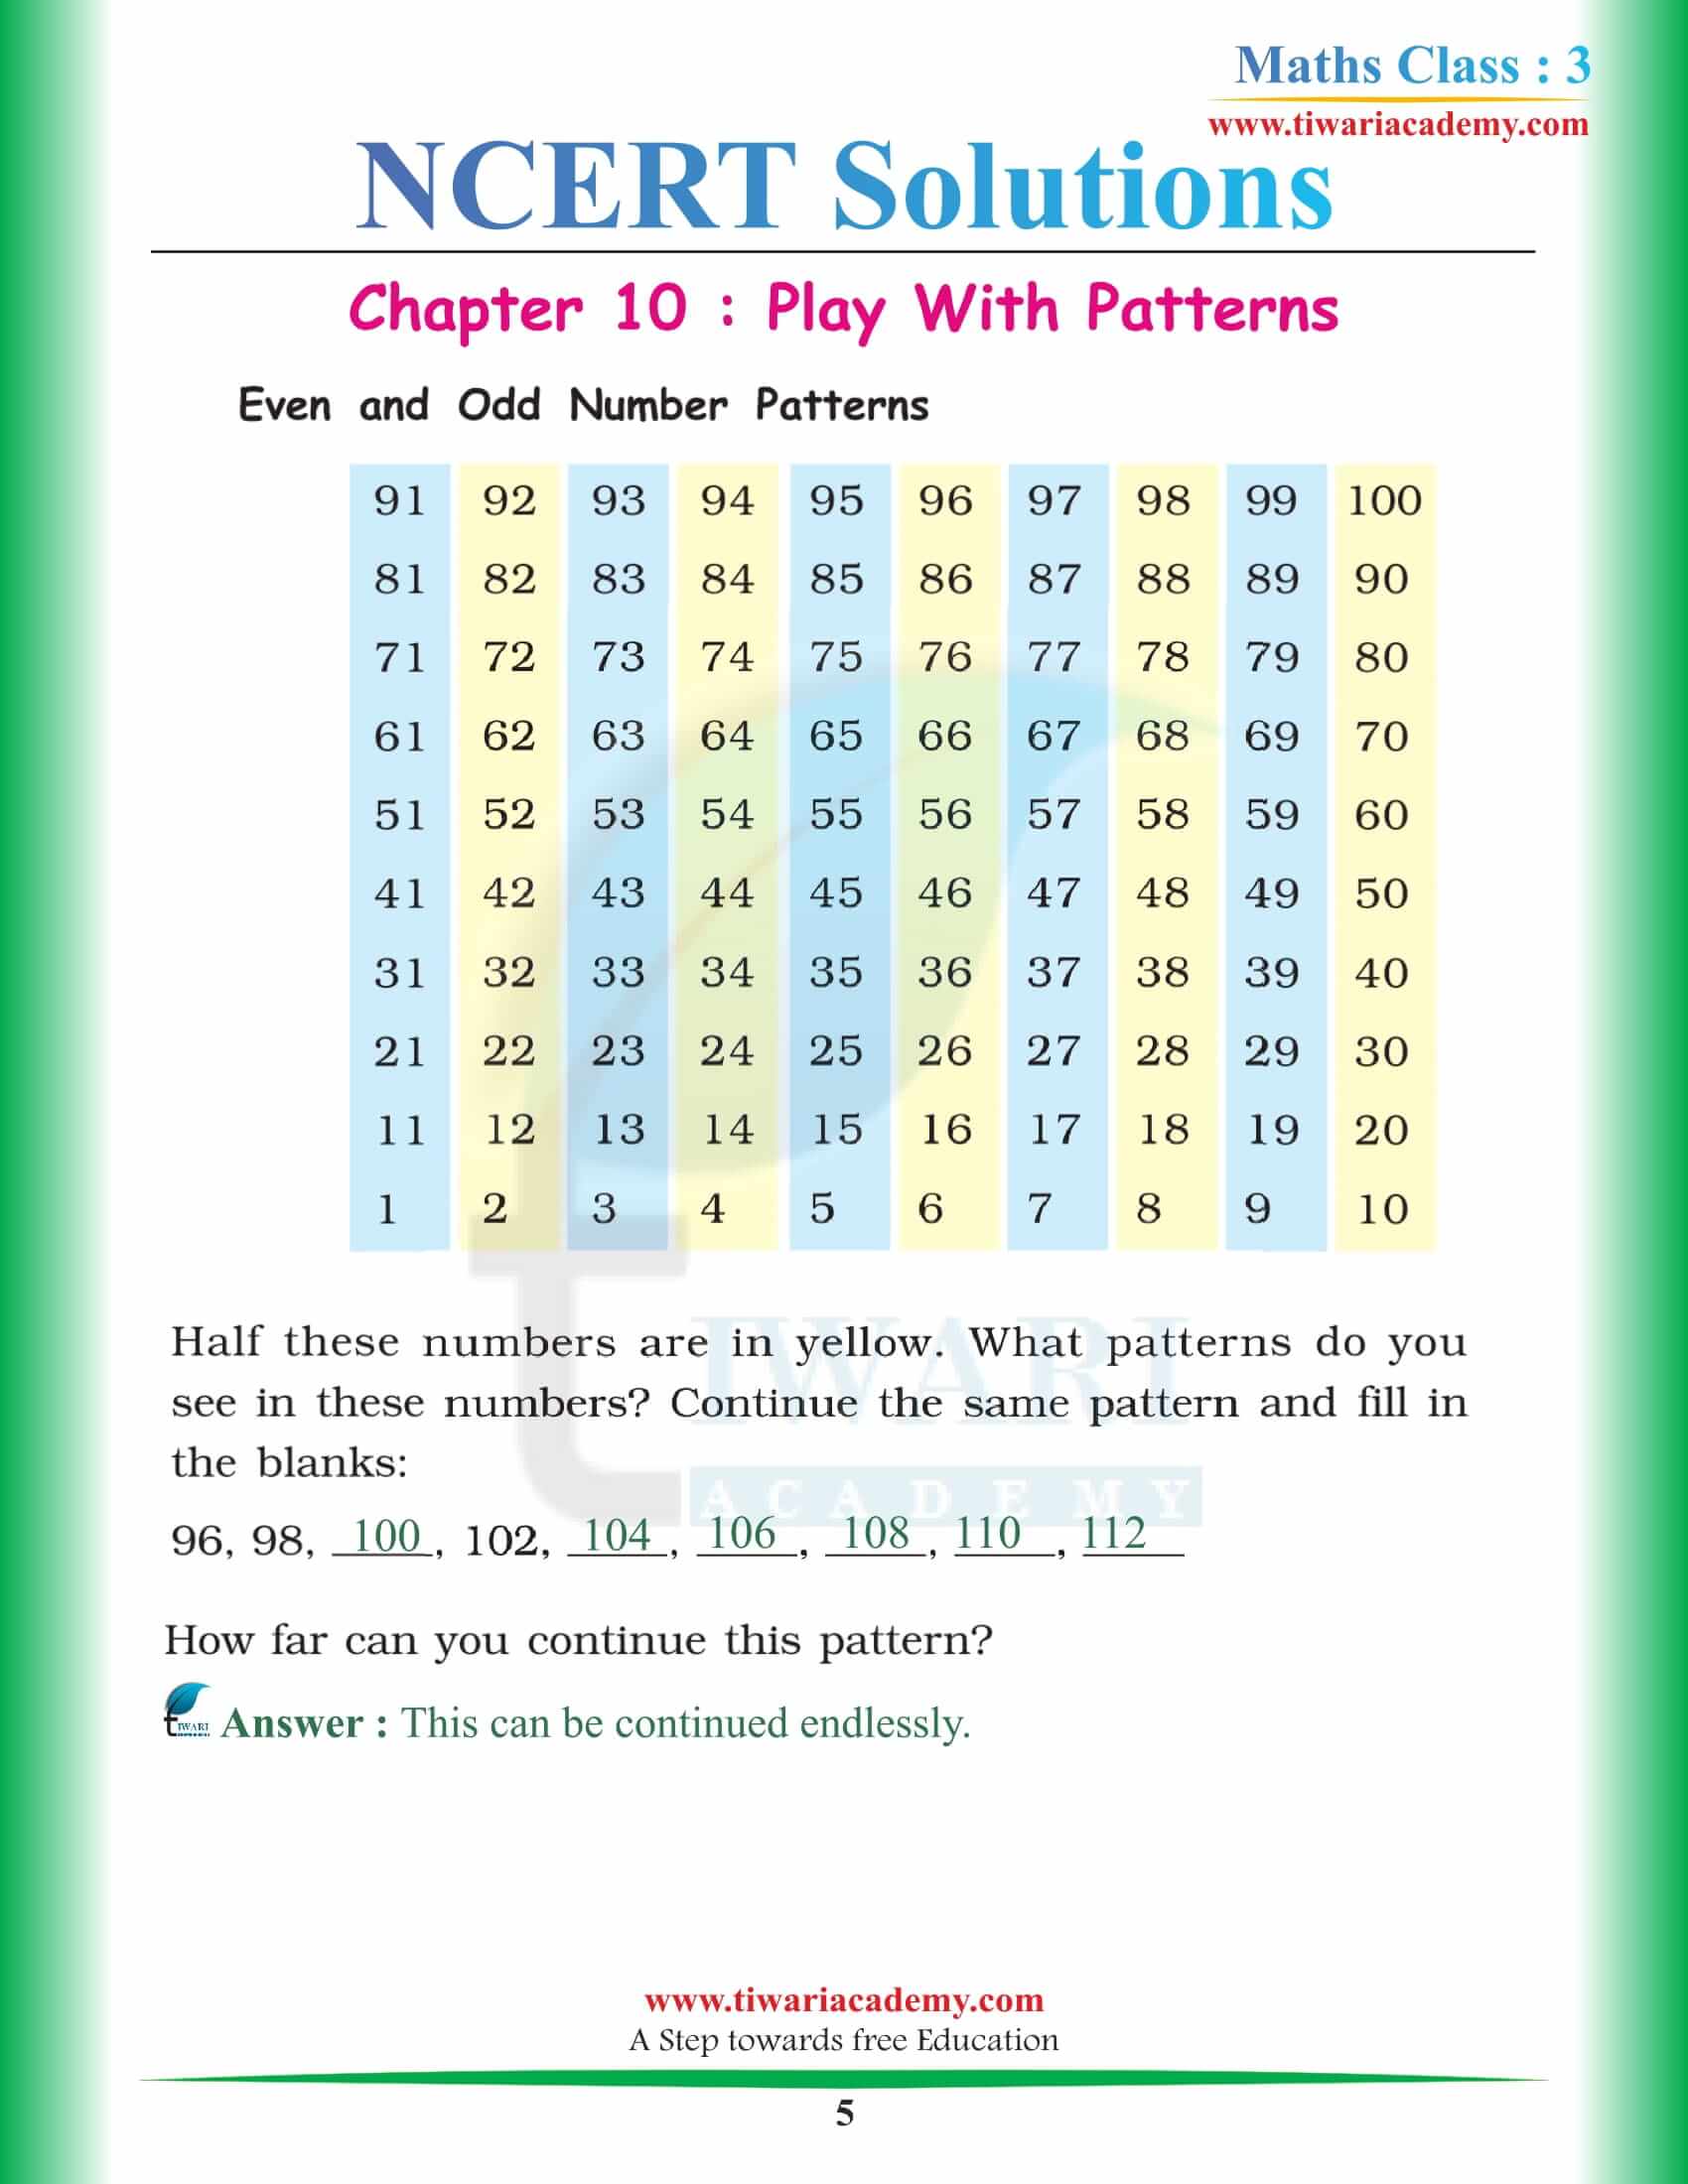 NCERT Solutions for Class 3 Maths Chapter 10 free download